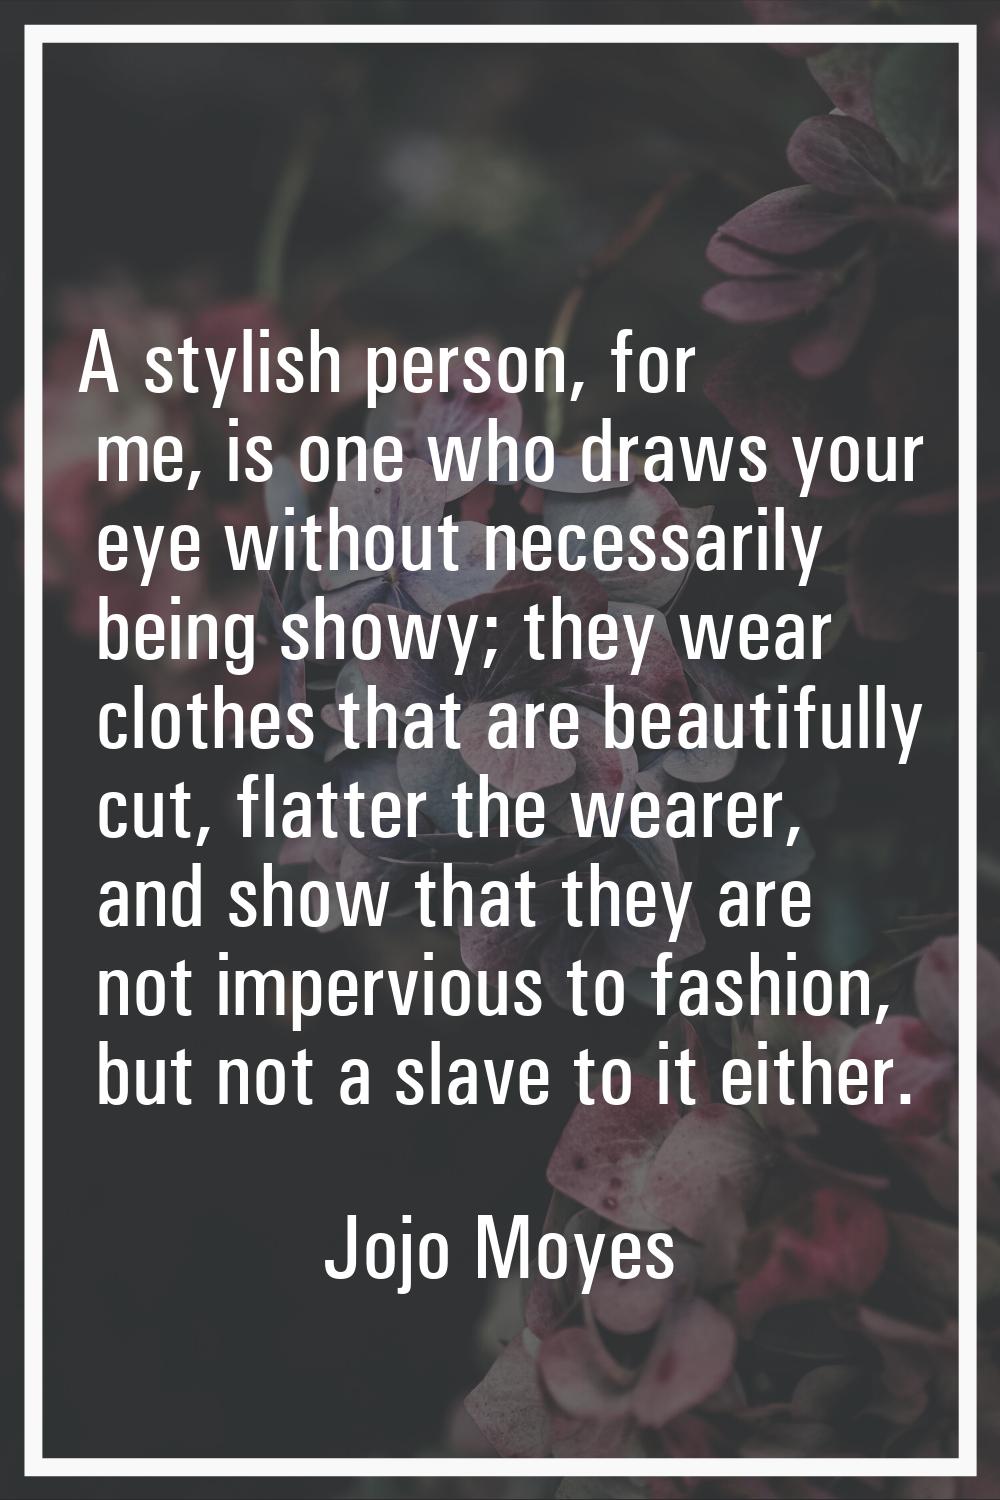 A stylish person, for me, is one who draws your eye without necessarily being showy; they wear clot